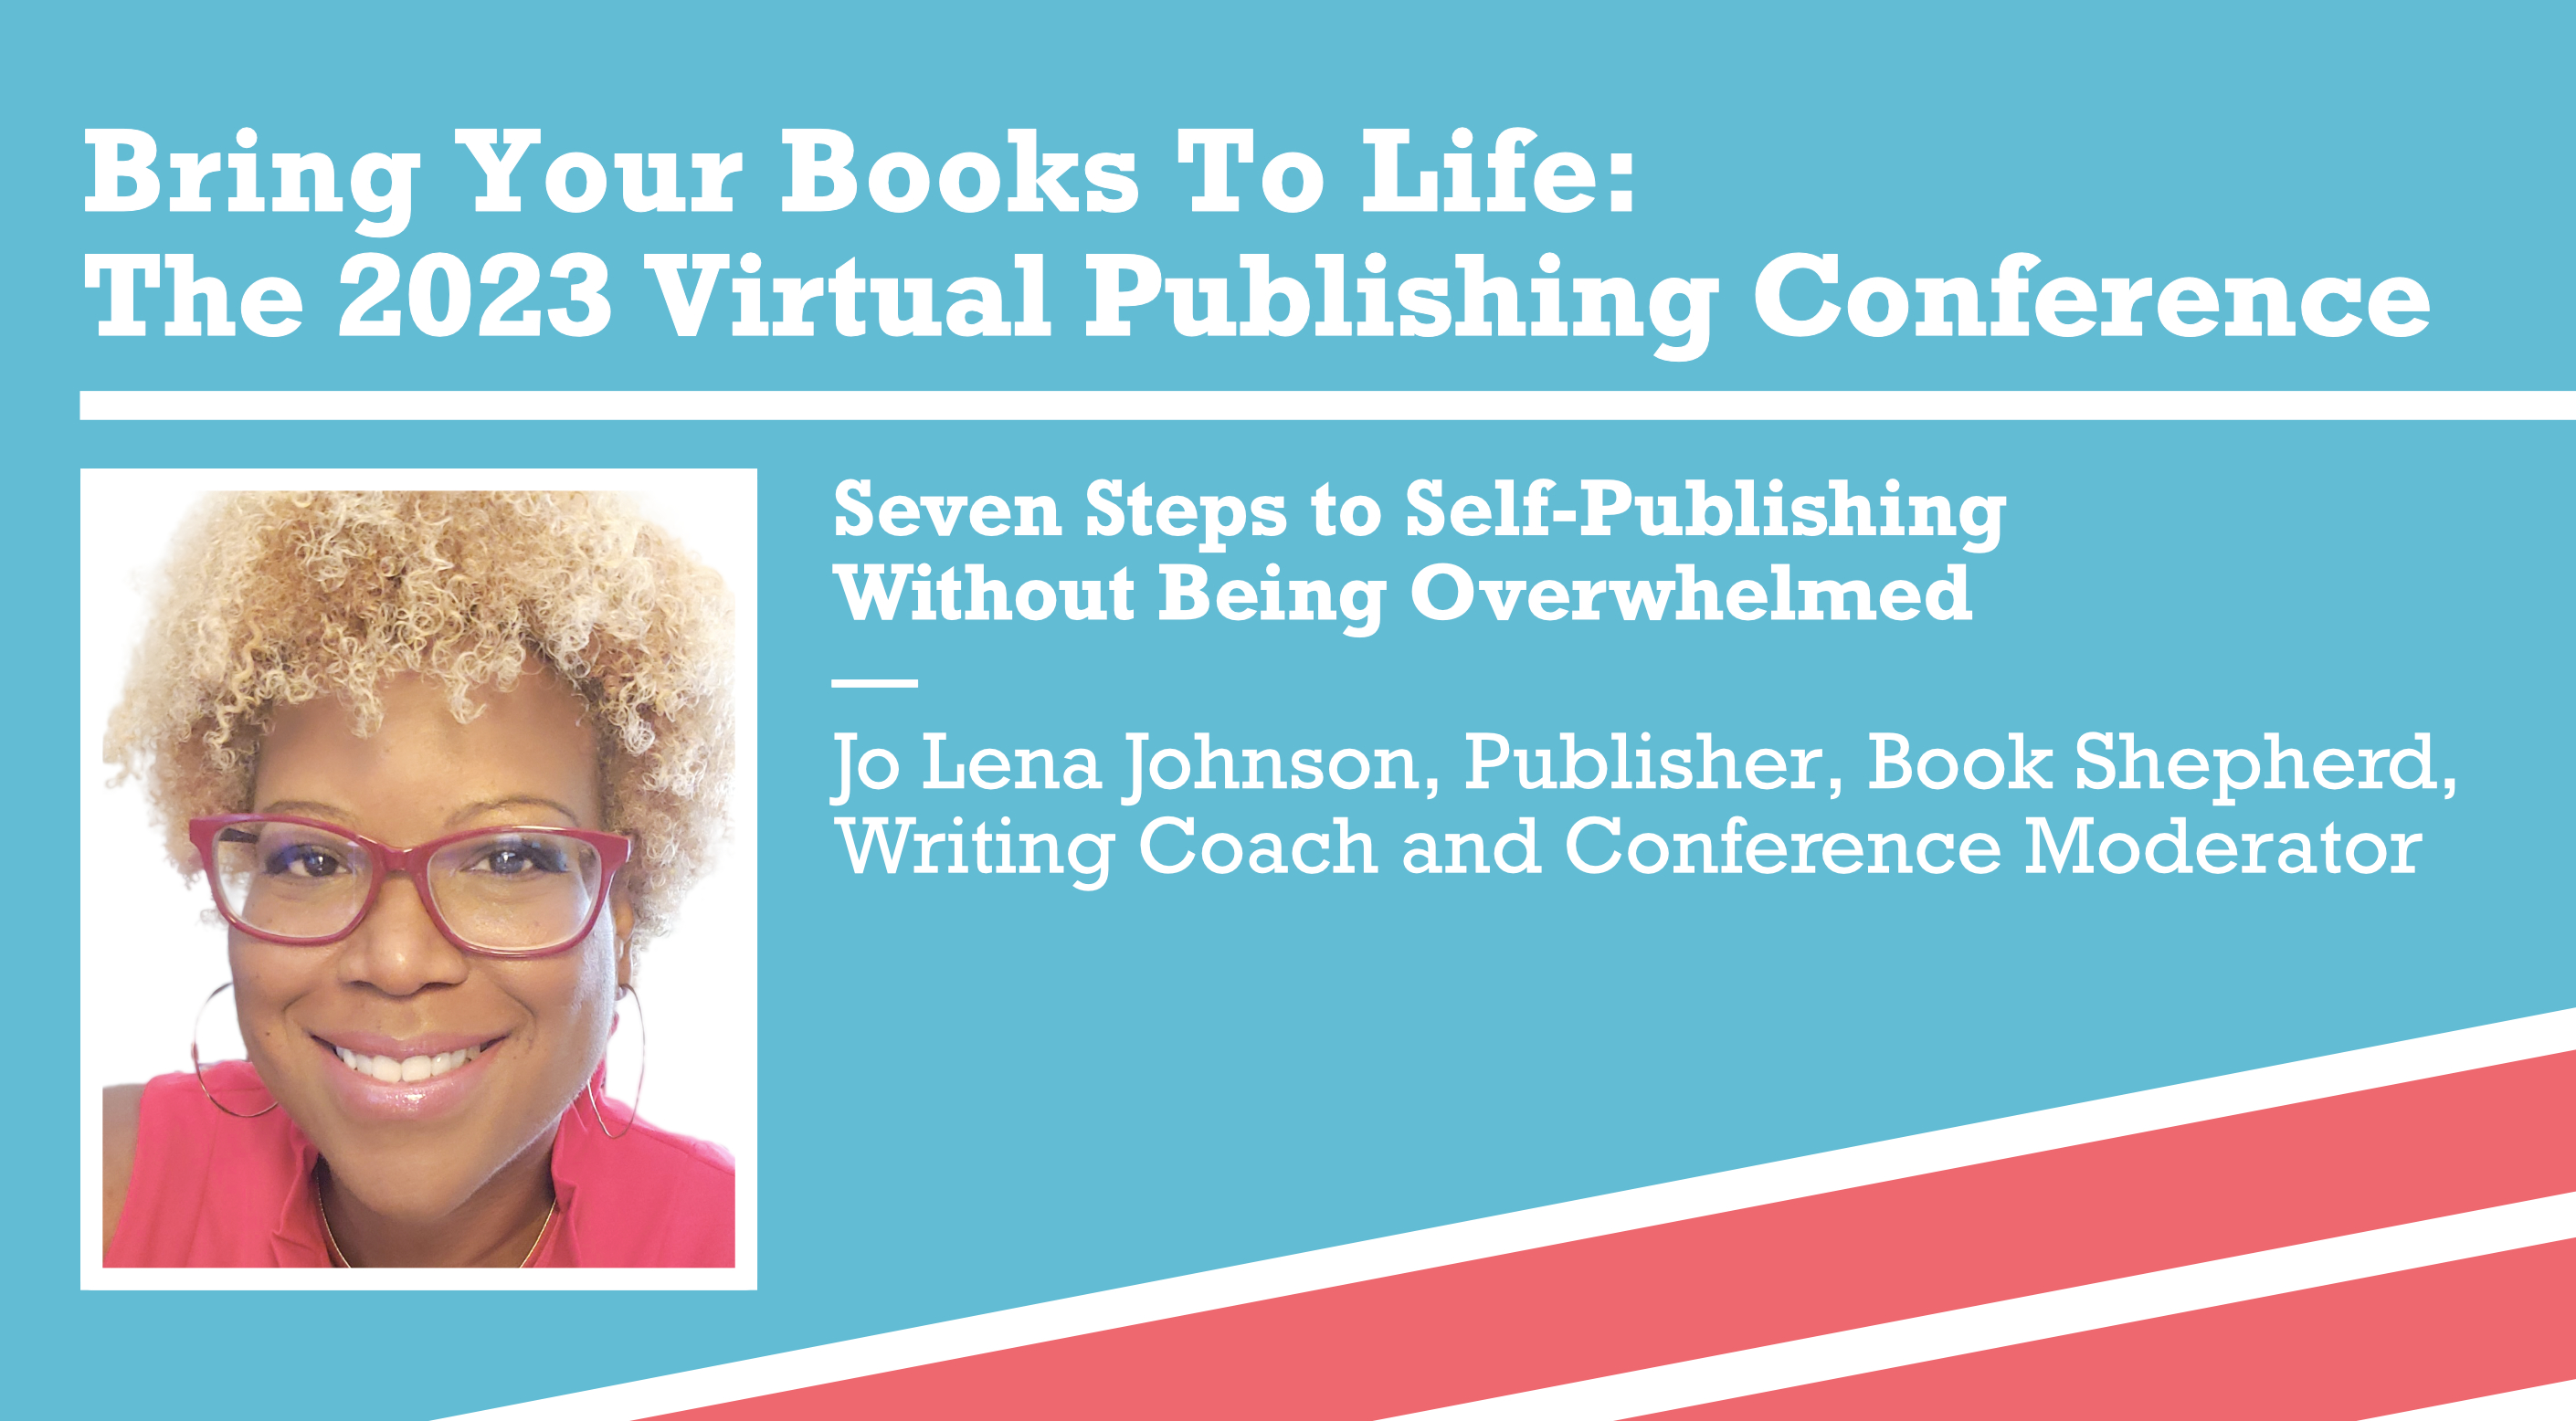 Seven Steps to Self-Publishing Without Being Overwhelmed — Jo Lena Johnson, Publisher, Book Shepherd, Writing Coach and Conference Moderator